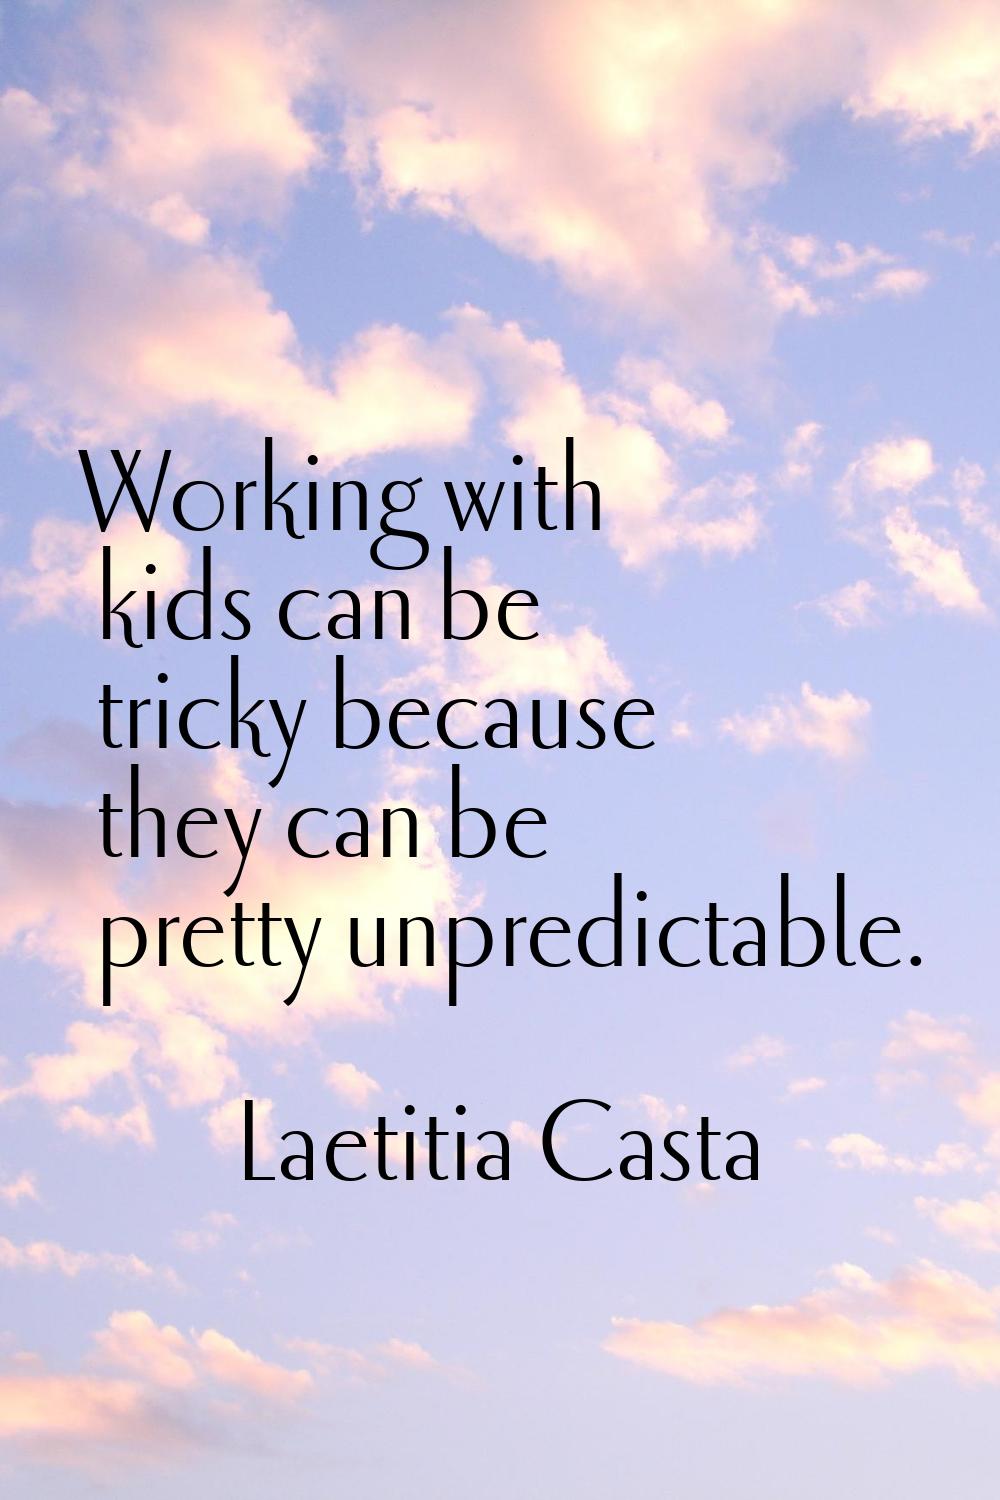 Working with kids can be tricky because they can be pretty unpredictable.